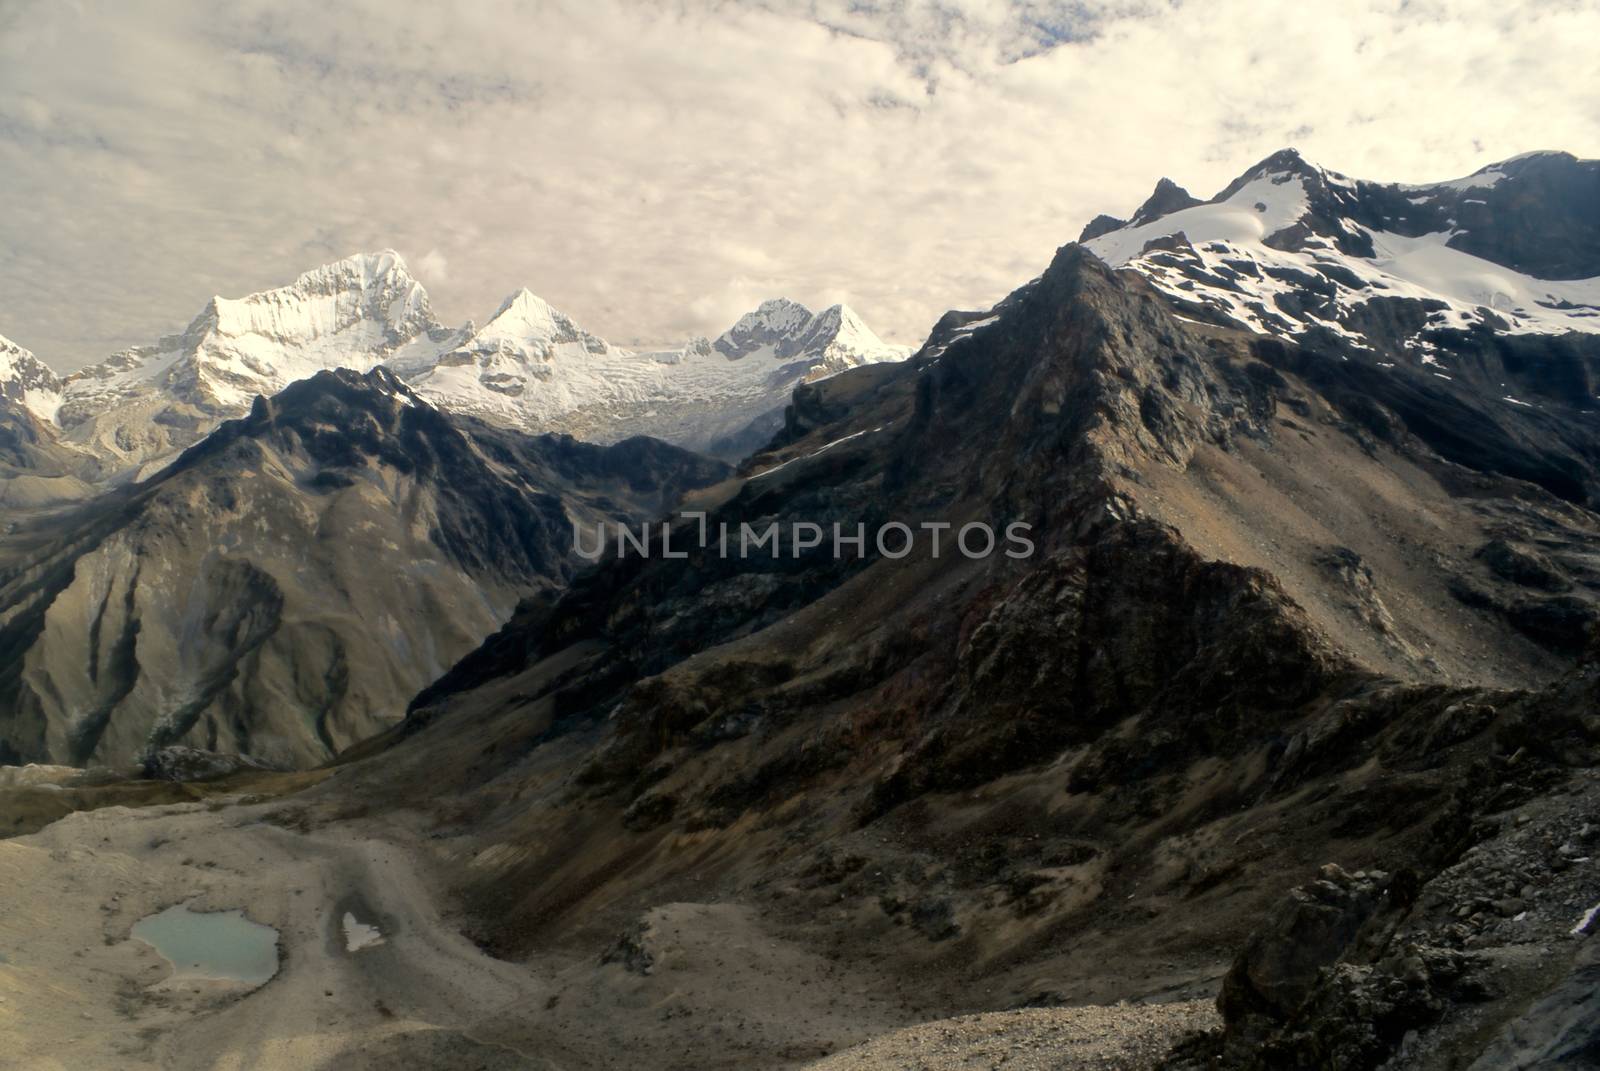 Picturesque canyons around Alpamayo, one of highest mountain peaks in Peruvian Andes, Cordillera Blanca